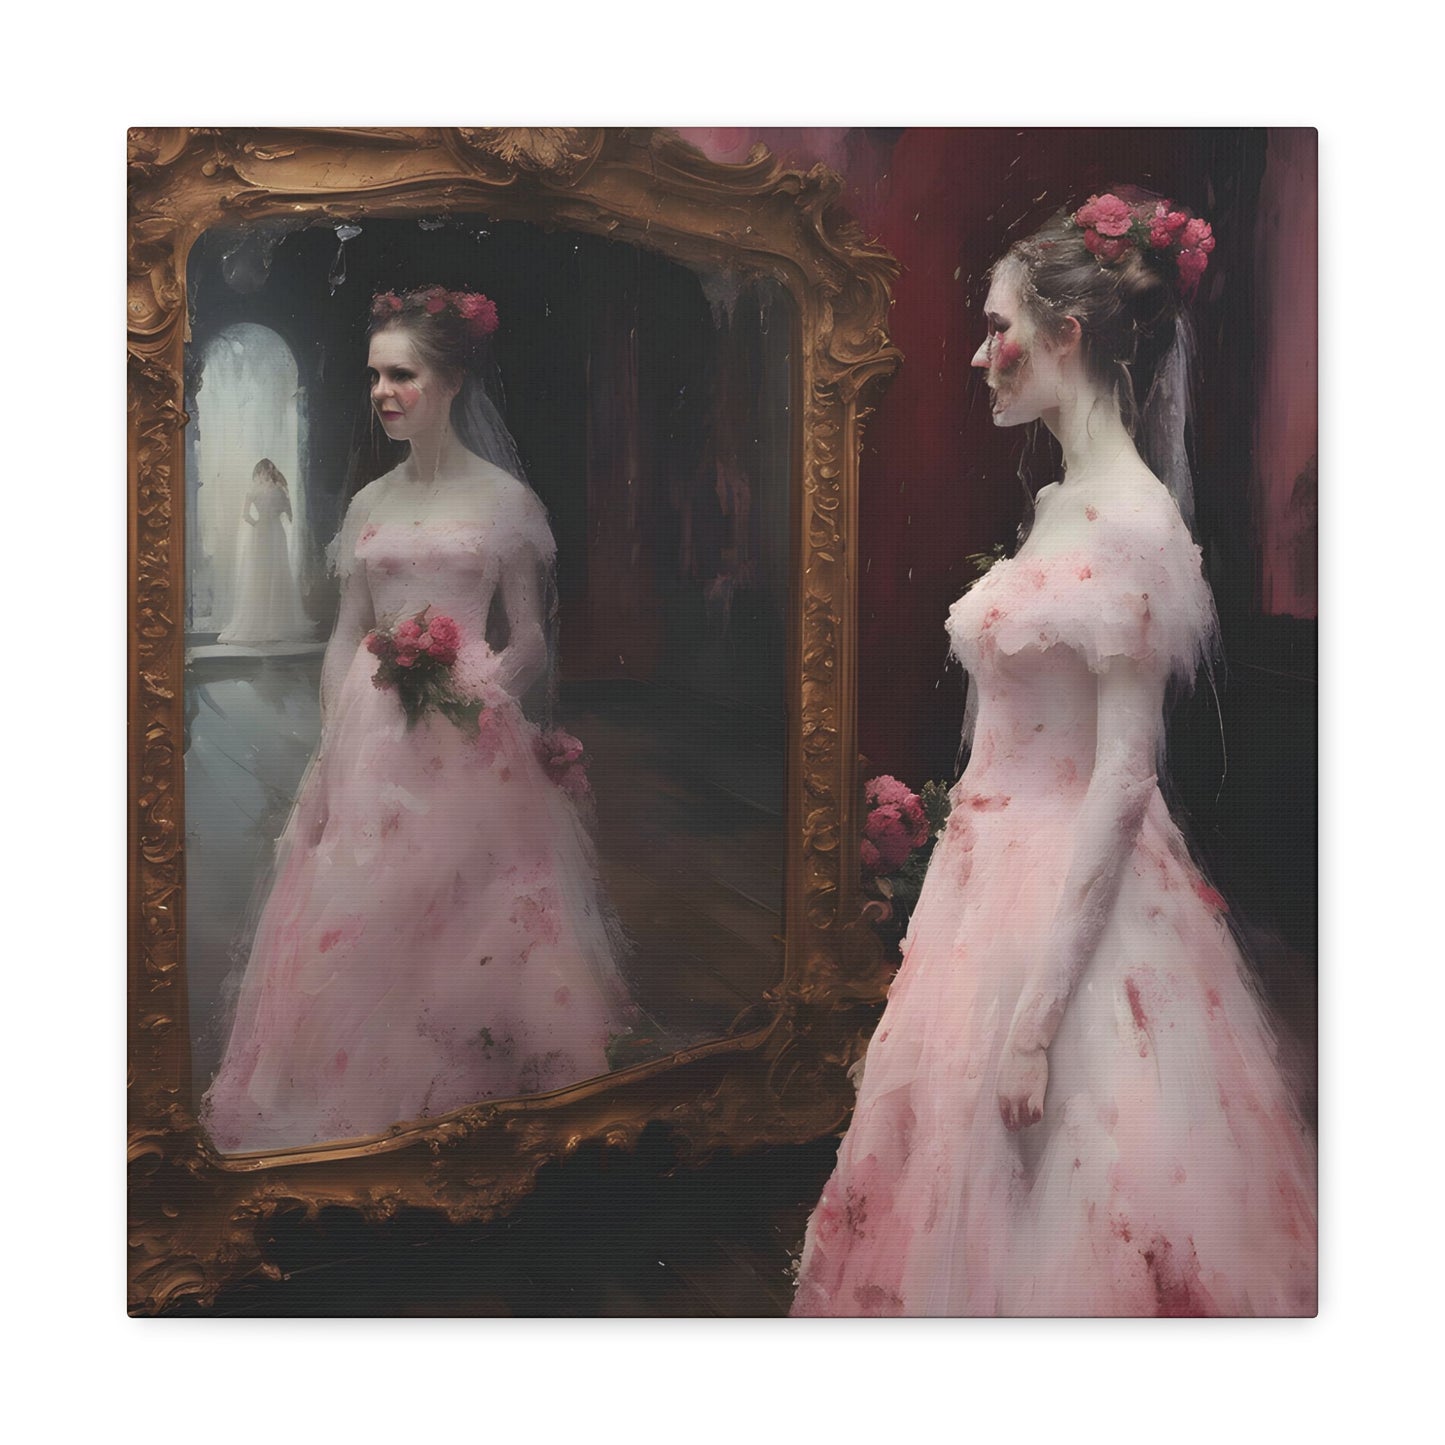 image 2 Reflections of a Timeless Moment' painting captures a bride in a vintage pink gown, reflecting in a grandiose mirror in a Victorian dressing room. The artwork contrasts the opulent gold frame with the room's dark tones, highlighting her delicate dress and tender expression, symbolizing personal reflection and quiet joy before a life-changing event